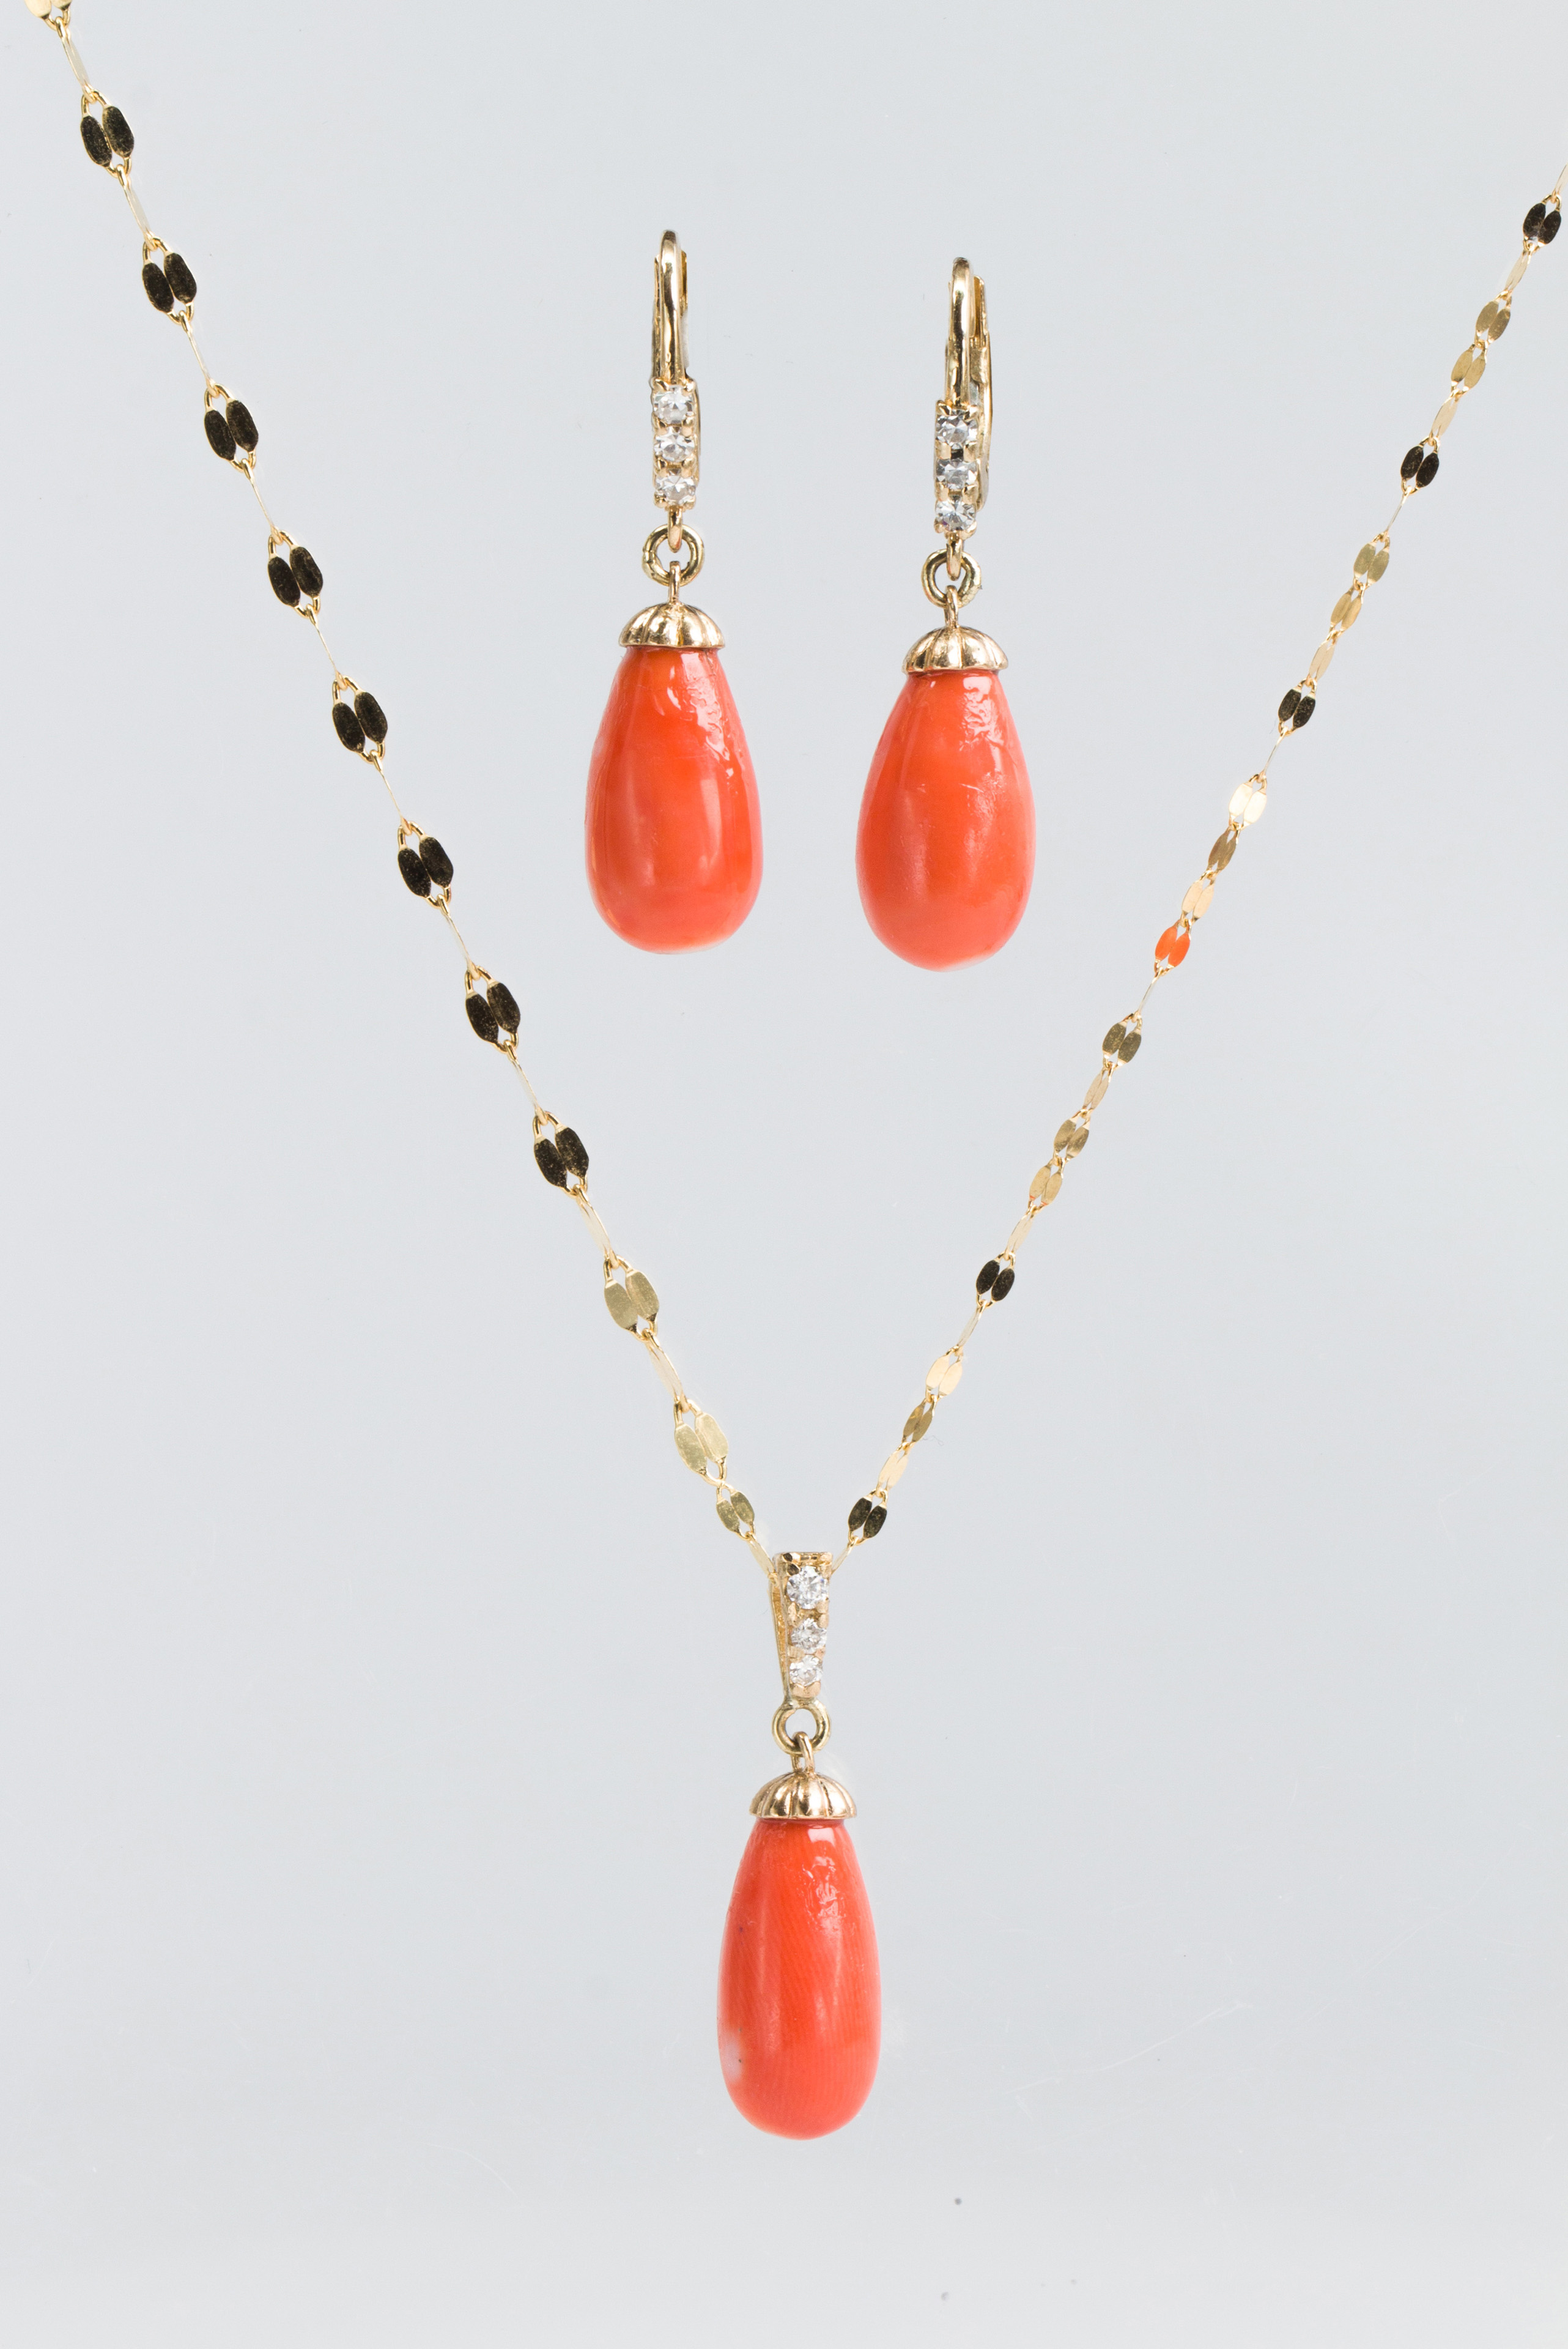 Coral, diamond, 14k yellow gold jewelry suite